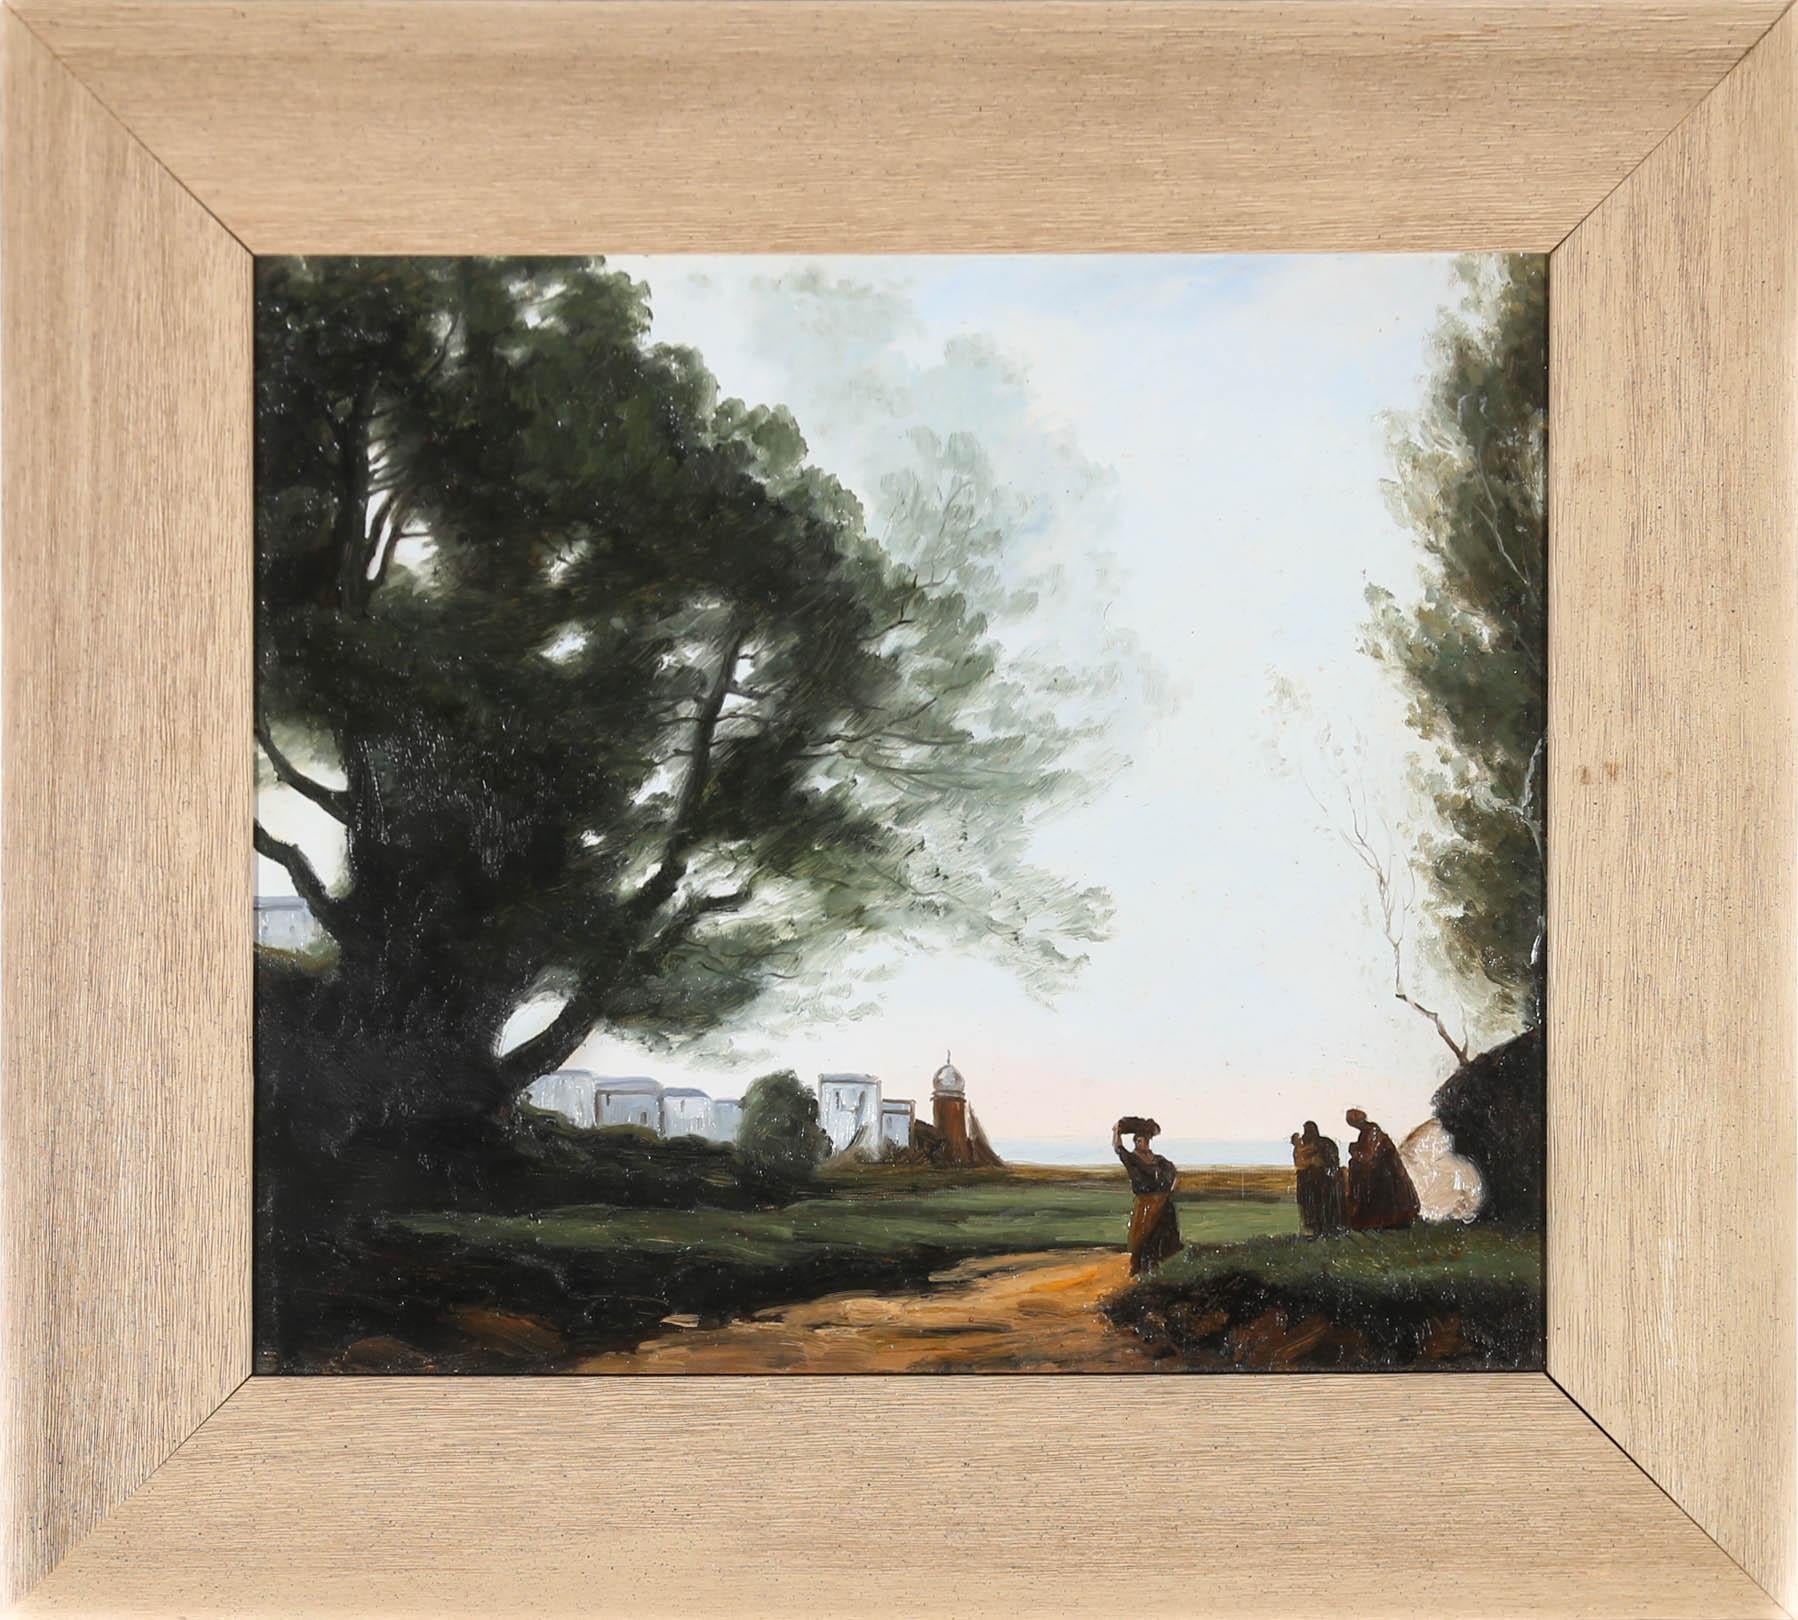 An original acrylic by John Foulger (1943-2007), depicting an eastern scene in the manner of admired french artist Jean-Baptiste-Camille Corot. Smartly mounted in a wide and textured wood frame. Unsigned. On canvas laid to board. 